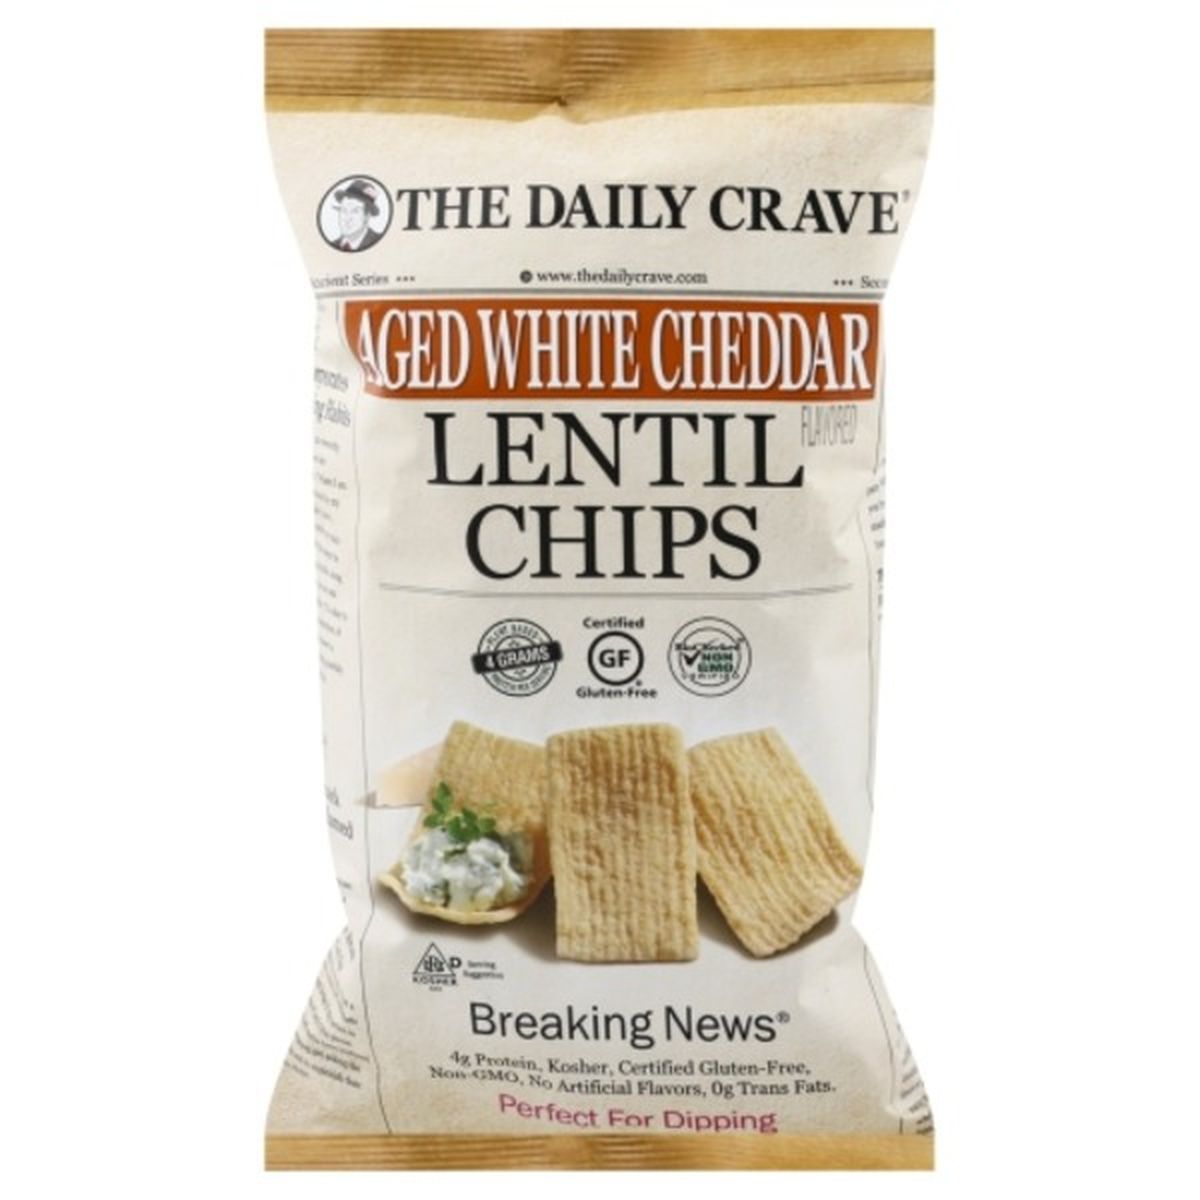 Calories in The Daily Crave Lentil Chips, Age White Cheddar